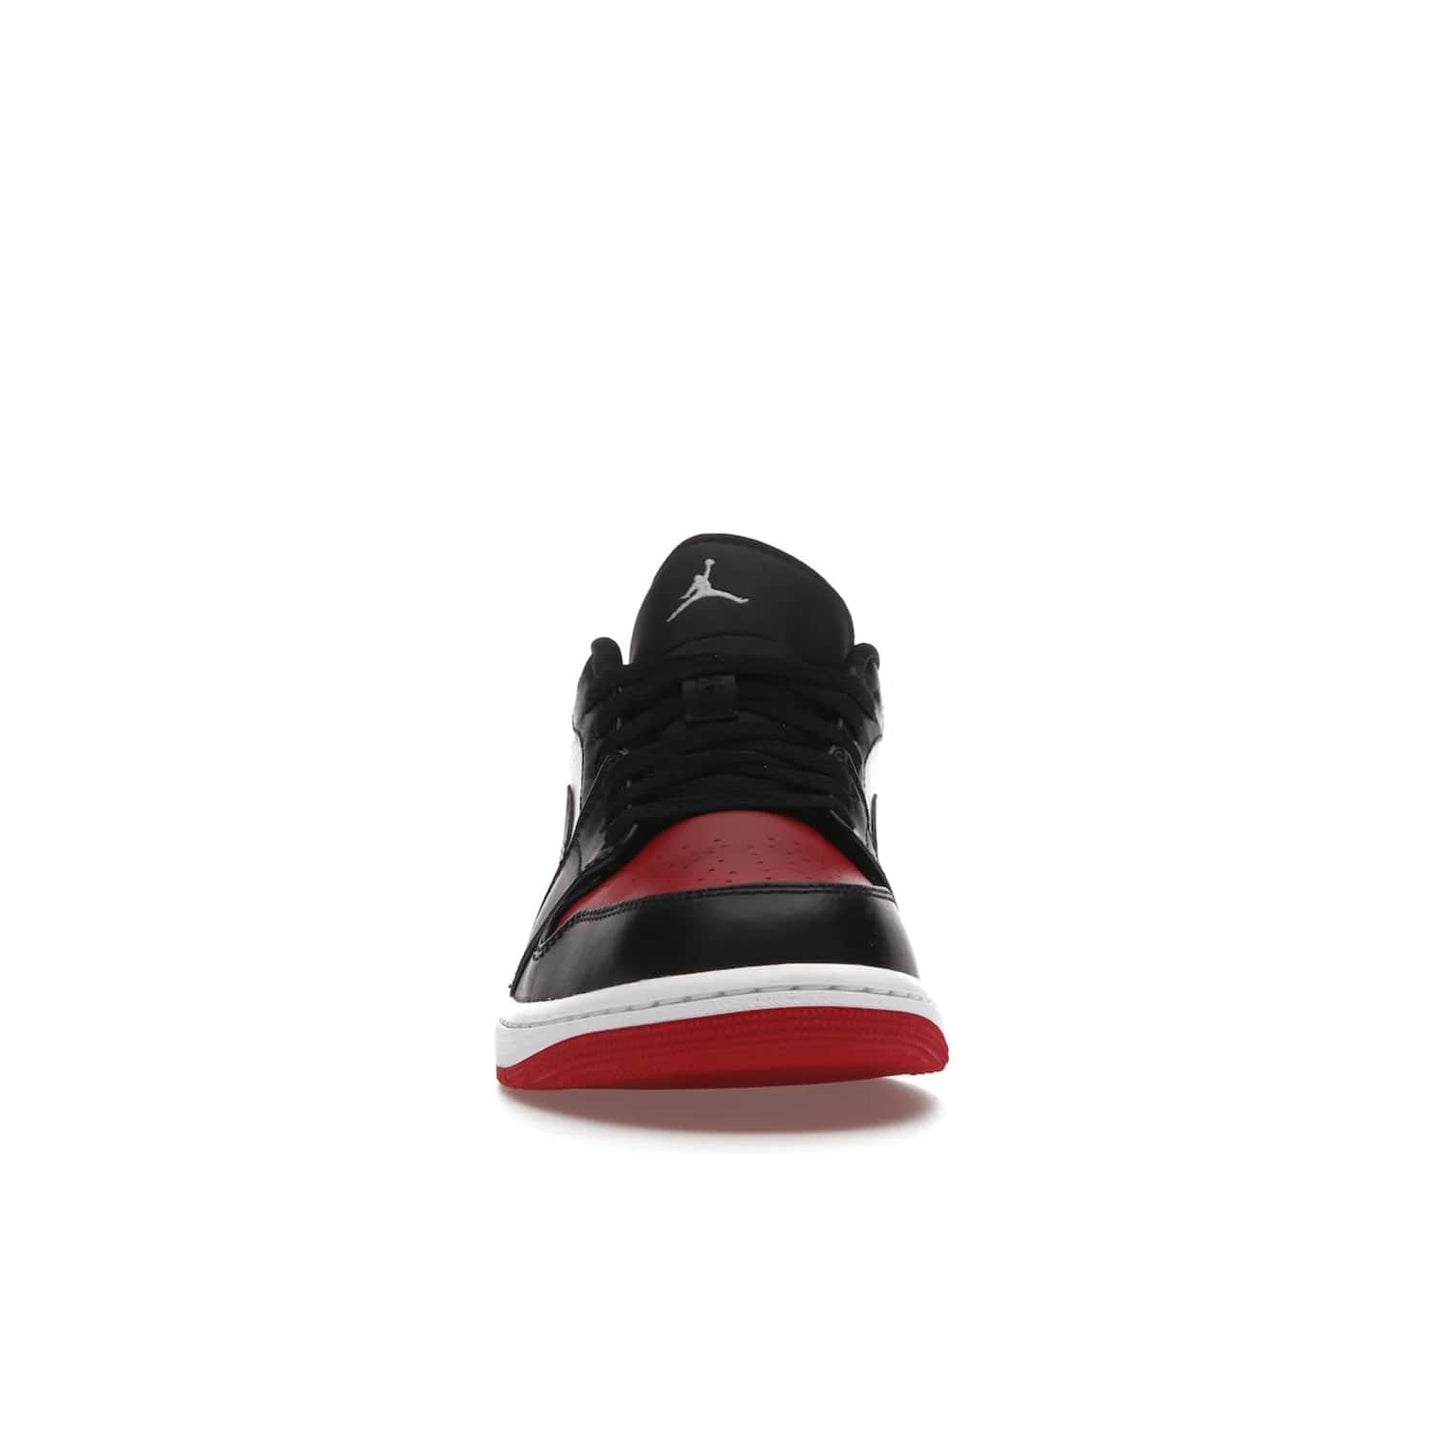 Jordan 1 Low Bred Toe - Image 10 - Only at www.BallersClubKickz.com - Step into the iconic Jordan 1 Retro. Mixing and matching of leather in red, black, and white makes for a unique colorway. Finished off with a Wing logo embroidery & Jumpman label. Comfortable and stylish at an affordable $100, the Jordan 1 Low Bred Toe is perfect for any true sneaker fan.